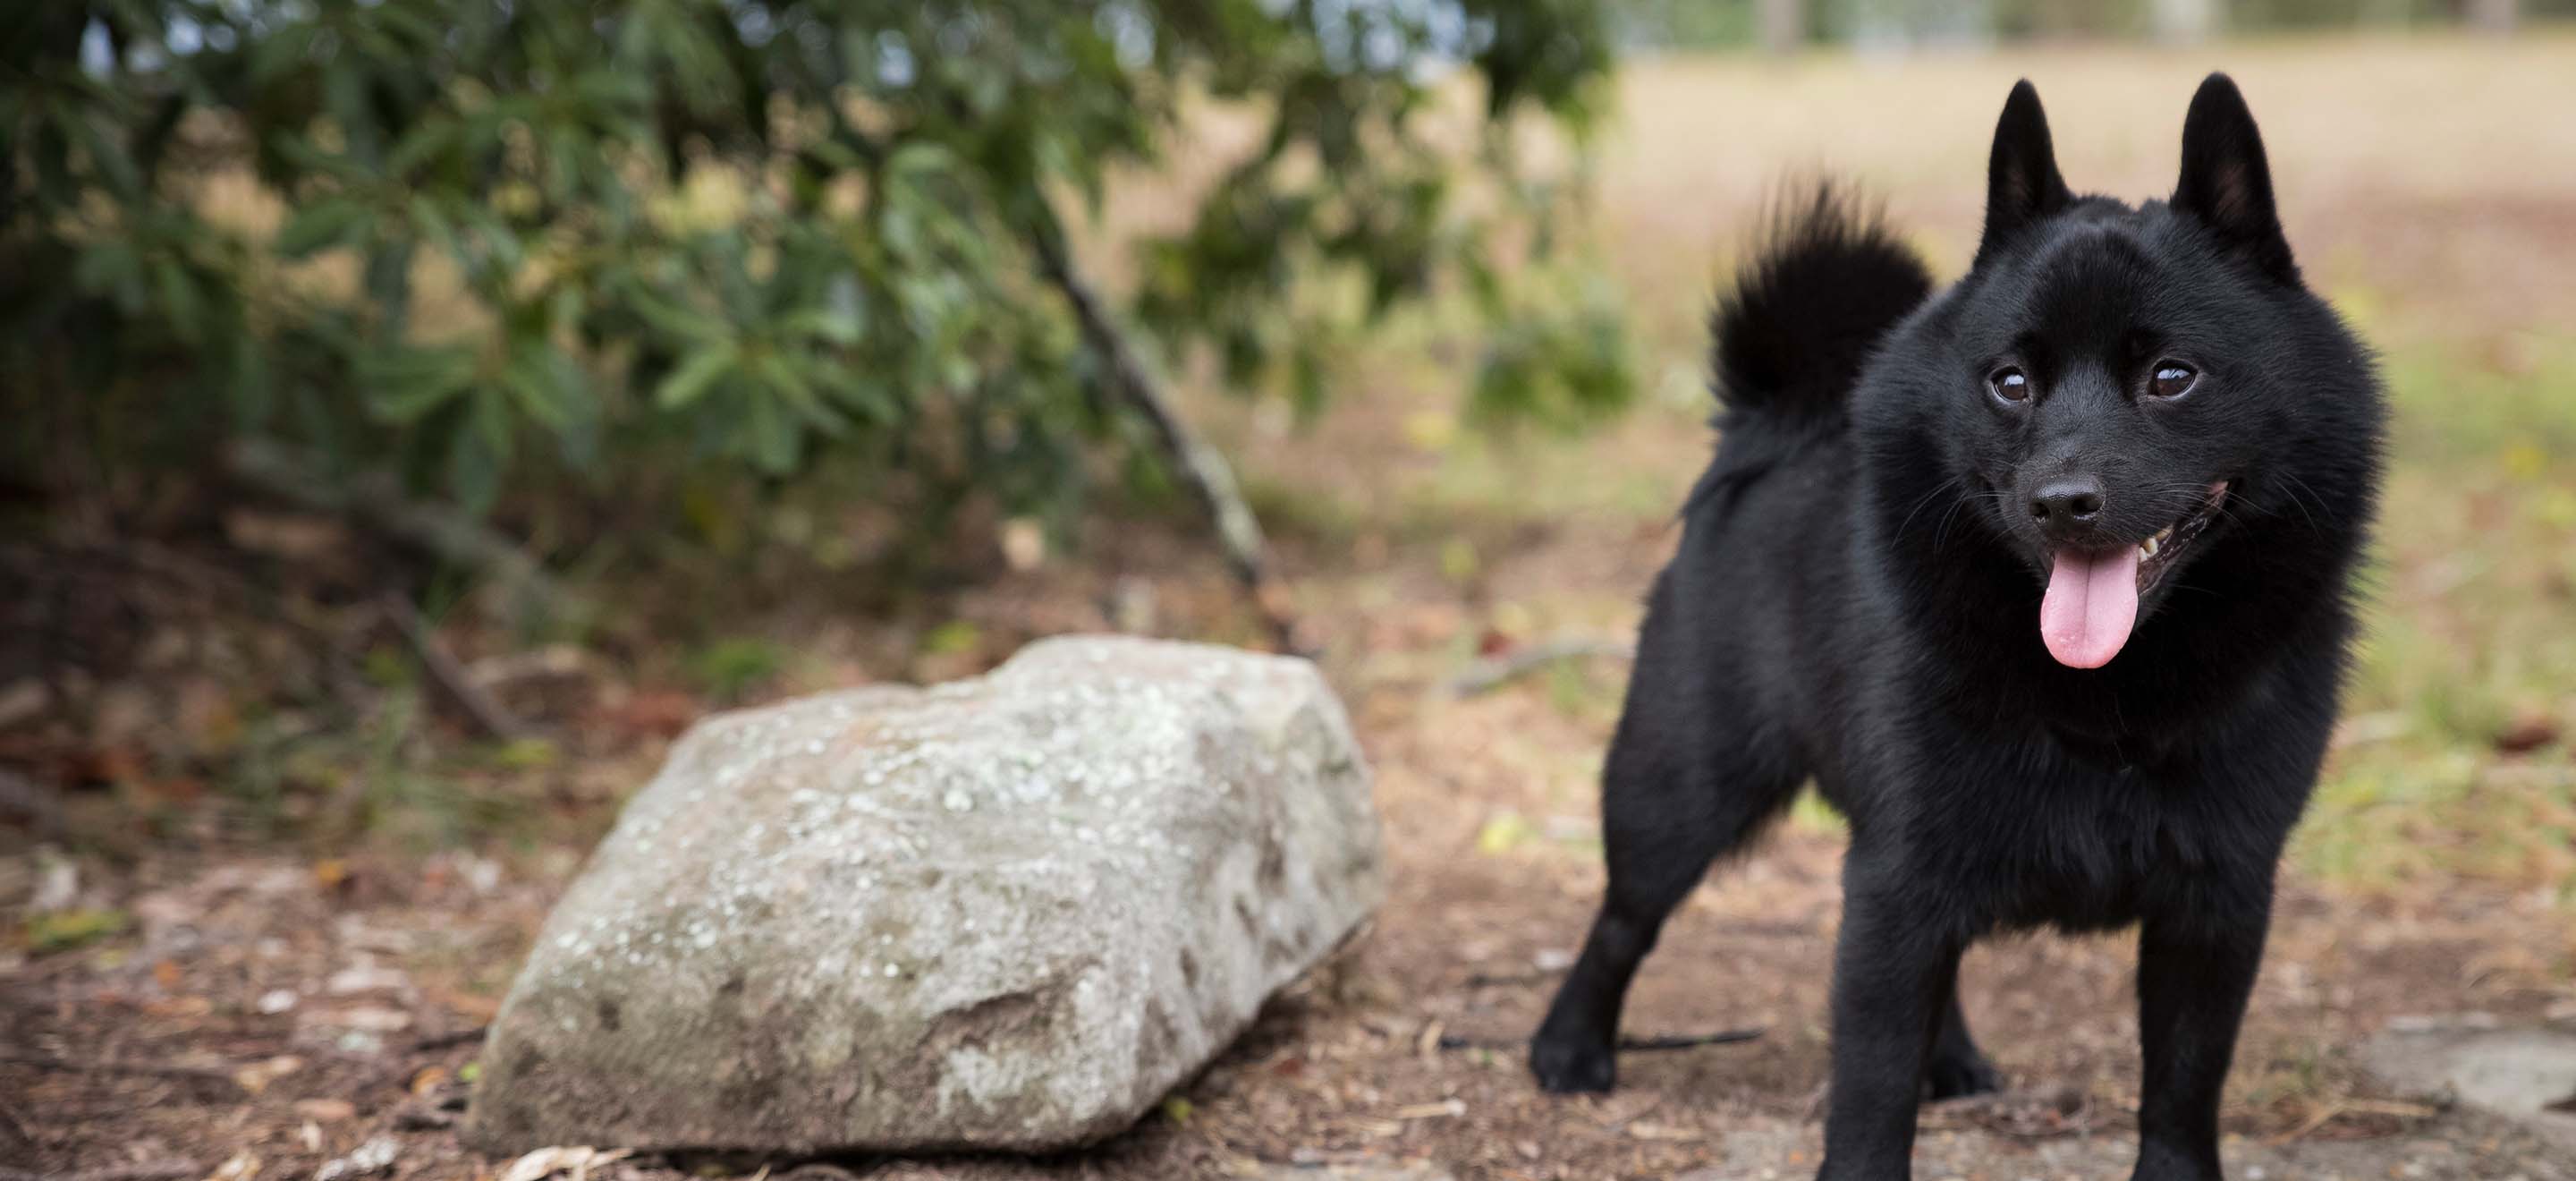 A black Schipperke dog standing at the edge of the forest image